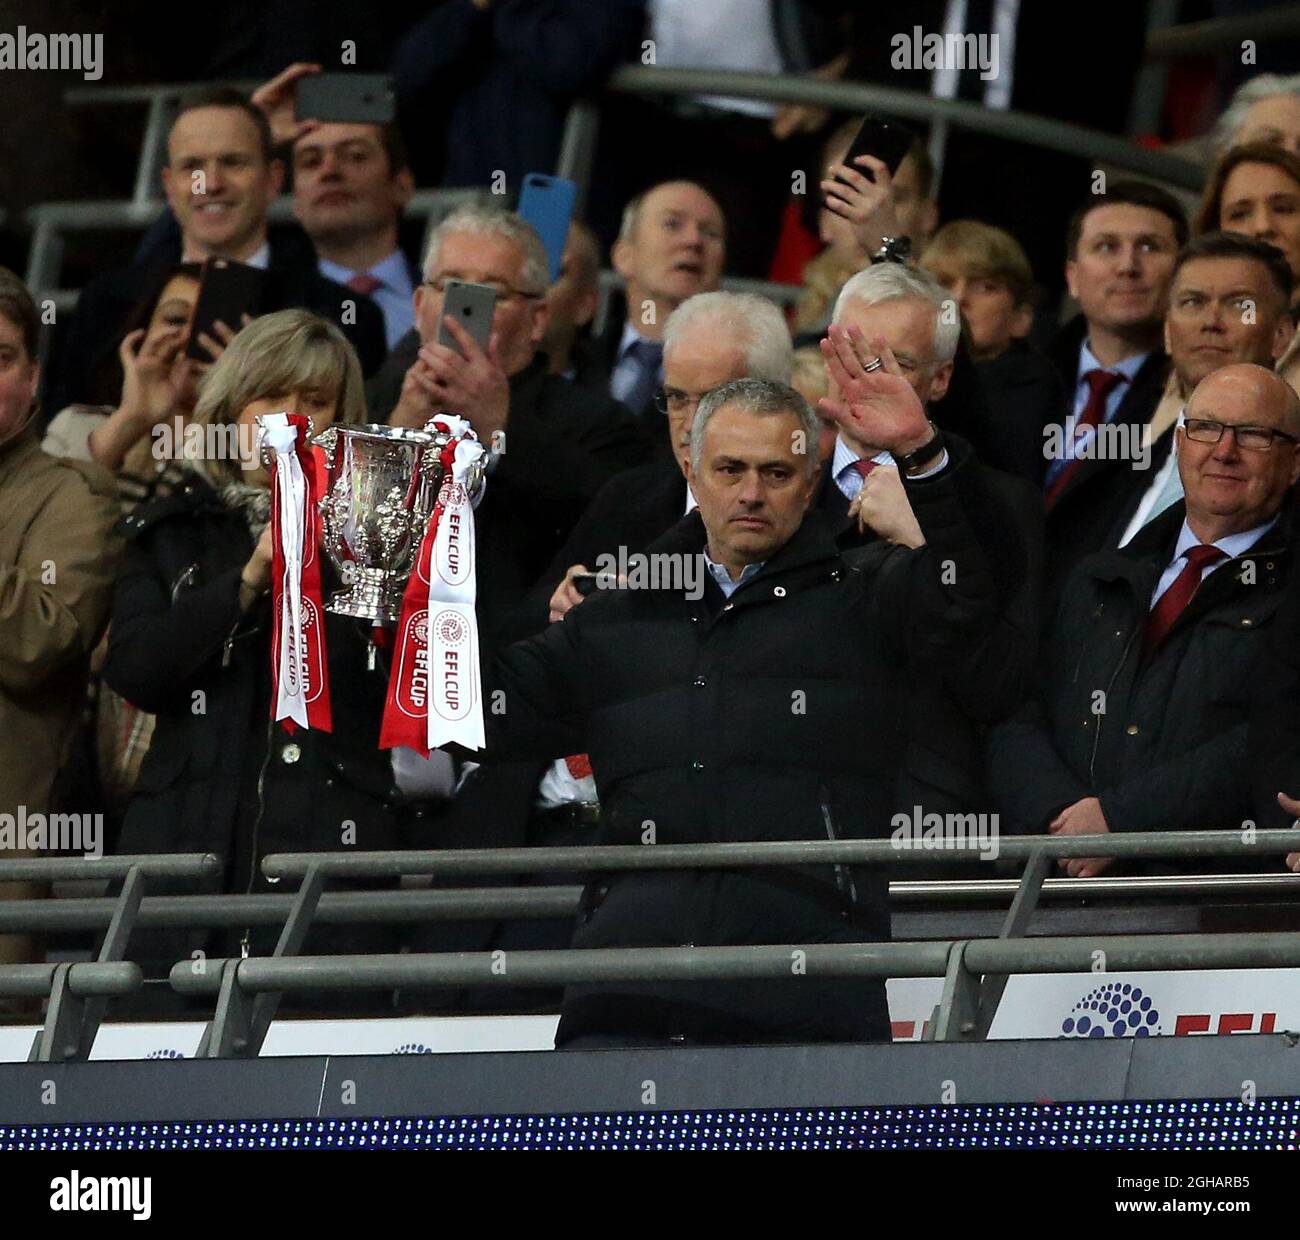 Jose Mourinho manager of Manchester United lifts the EFL trophy during the English Football League Cup Final  match at the Wembley Stadium, London. Picture date: February 26th, 2017.Pic credit should read: David Klein/Sportimage via PA Images Stock Photo